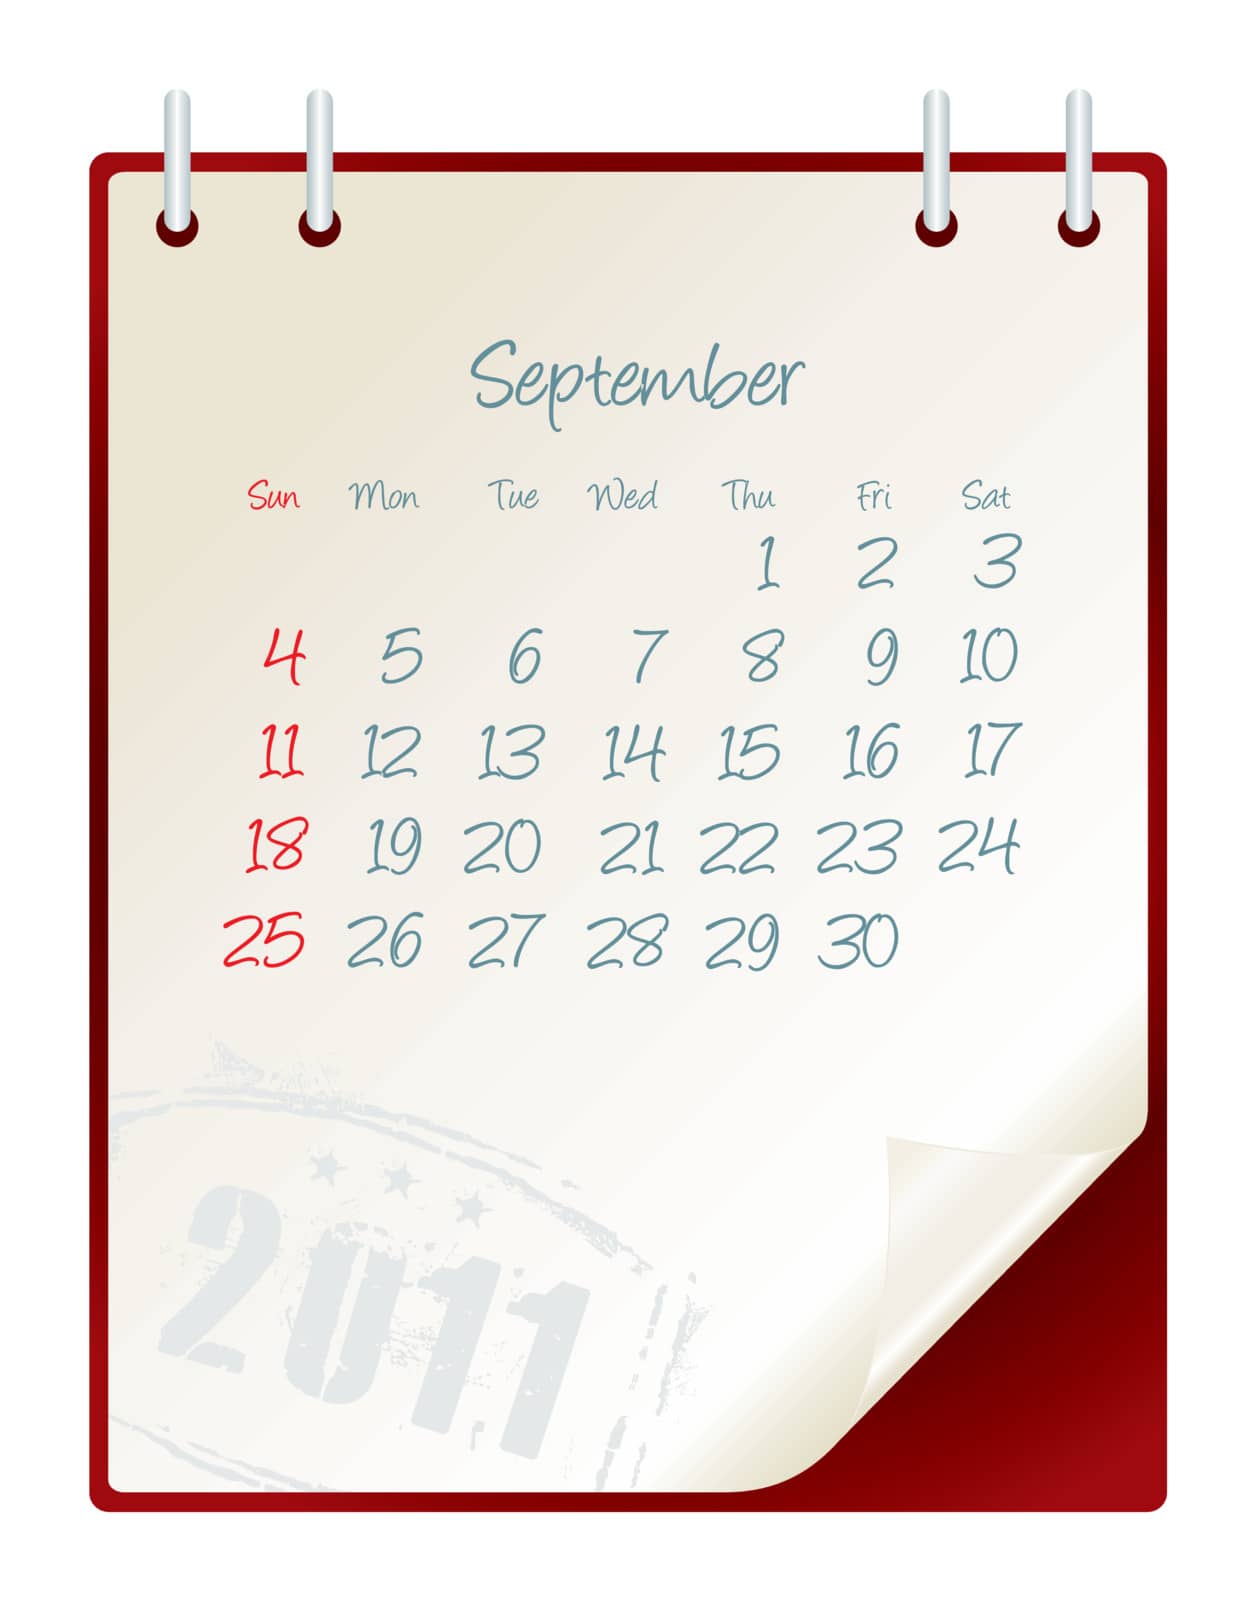 2011 calendar with a blanknote paper - vector illustration